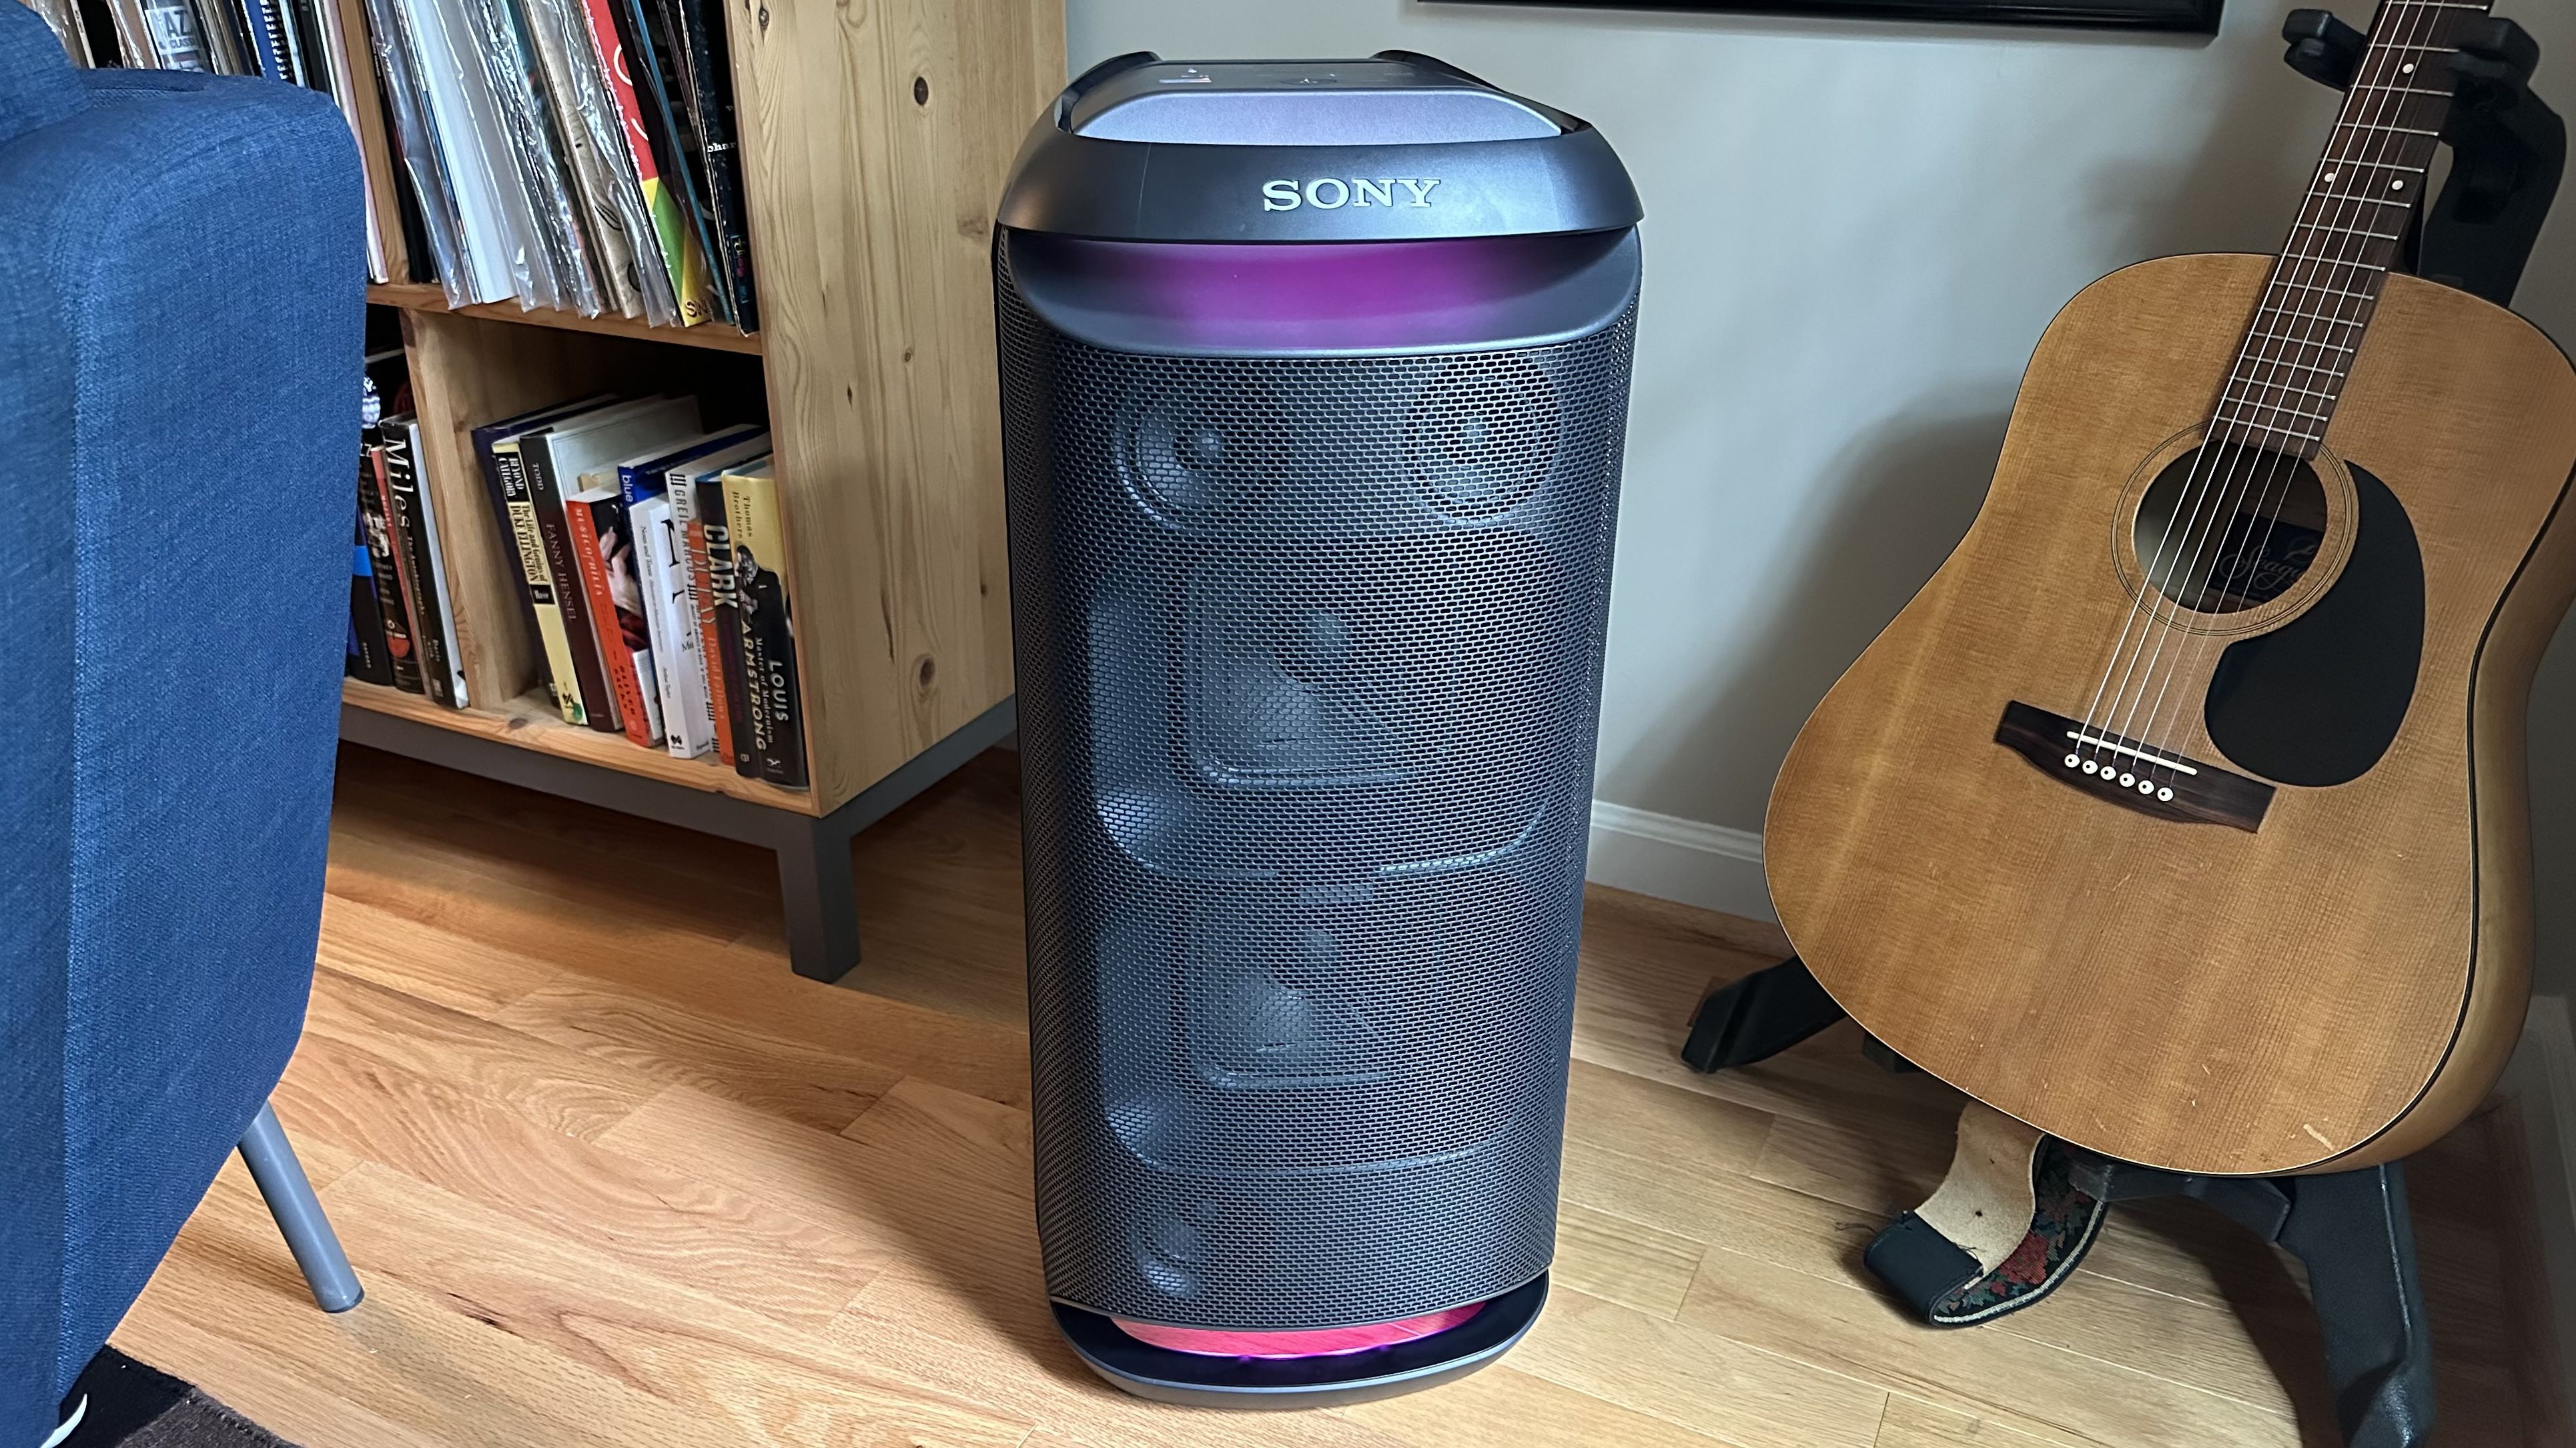 JBL Boost TV review: There are great small speakers. This isn't one.